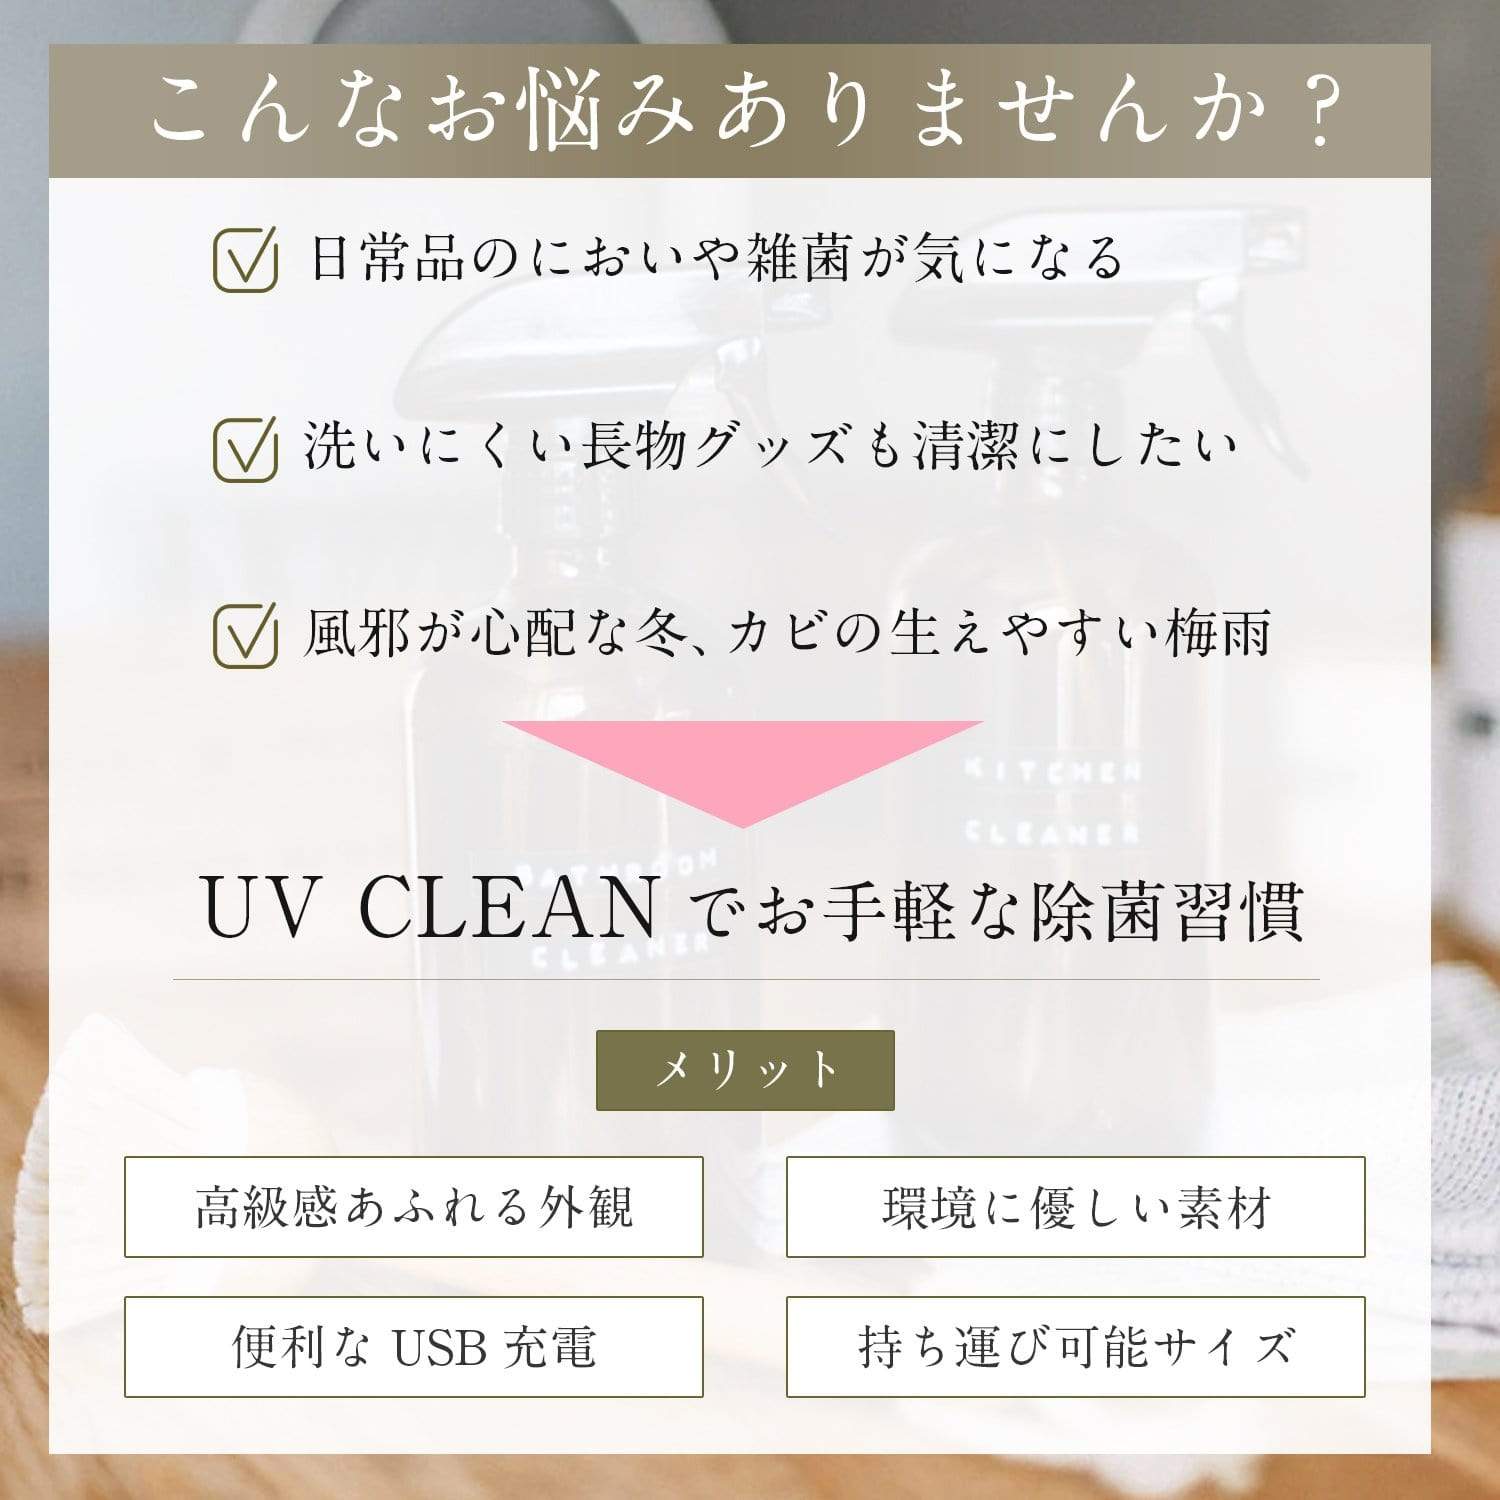 SSI Japan - Rechargable UV Clean Bag Toy Cleaners 4571361303124 CherryAffairs